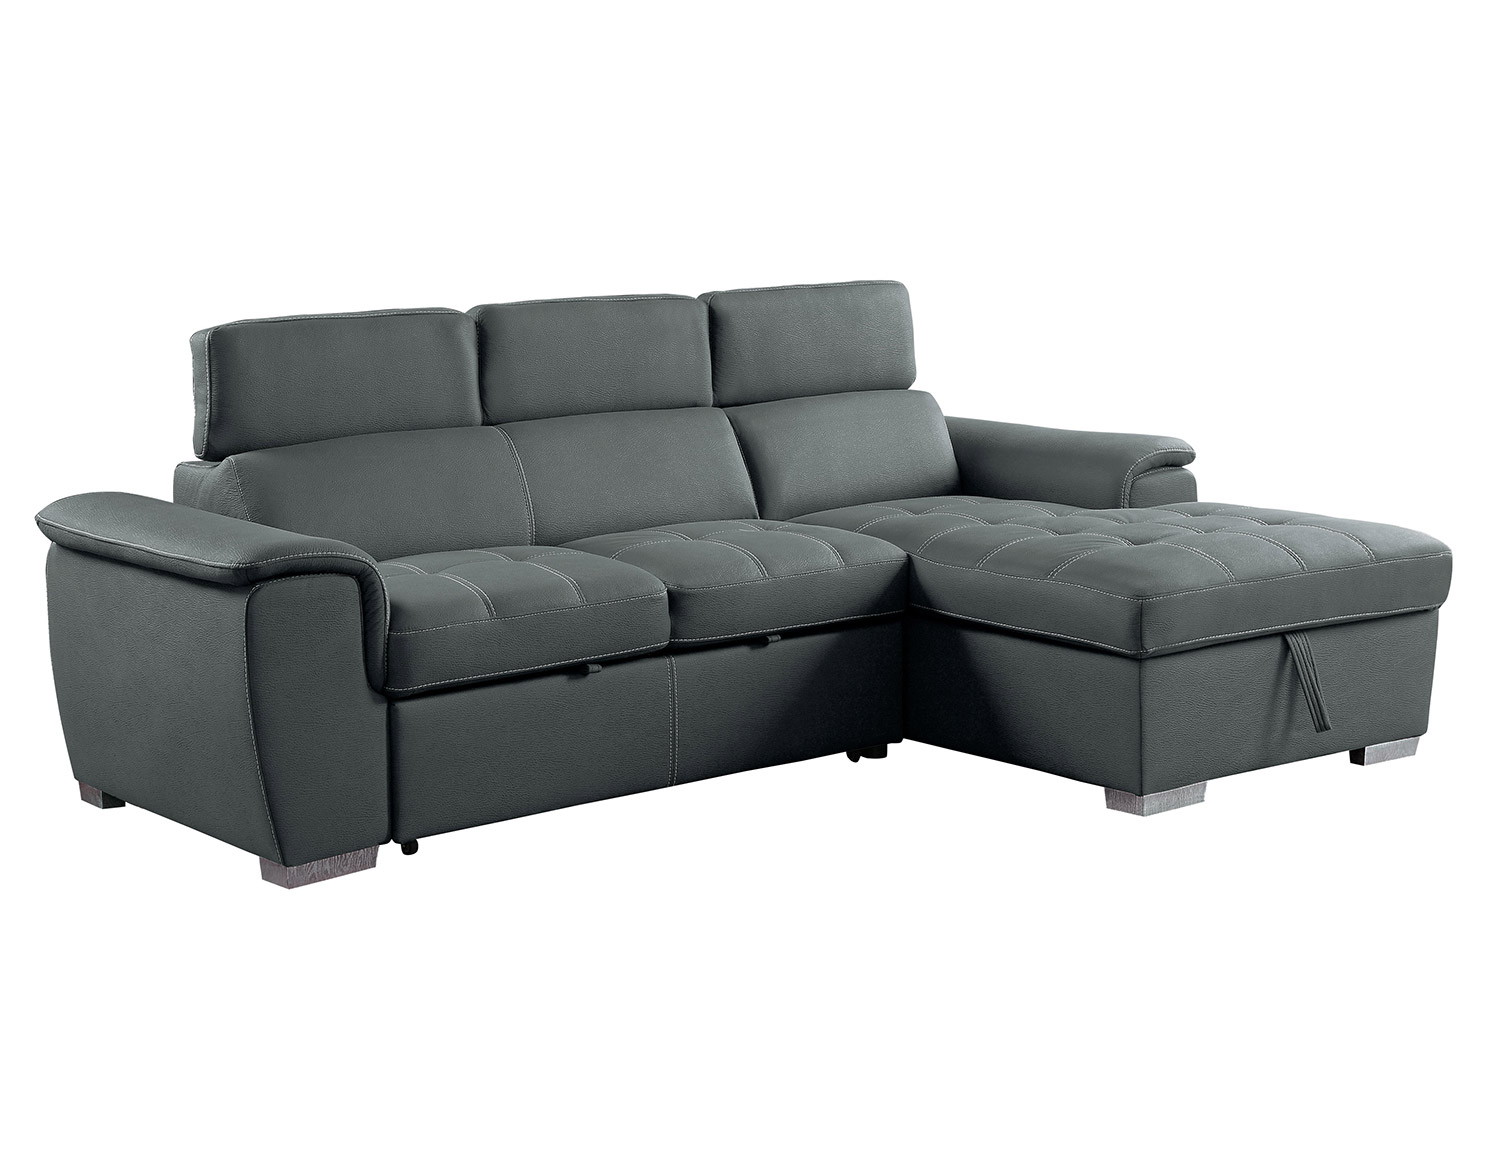 Homelegance Ferriday Sectional with Pull-out Bed and Hidden Storage - Gray